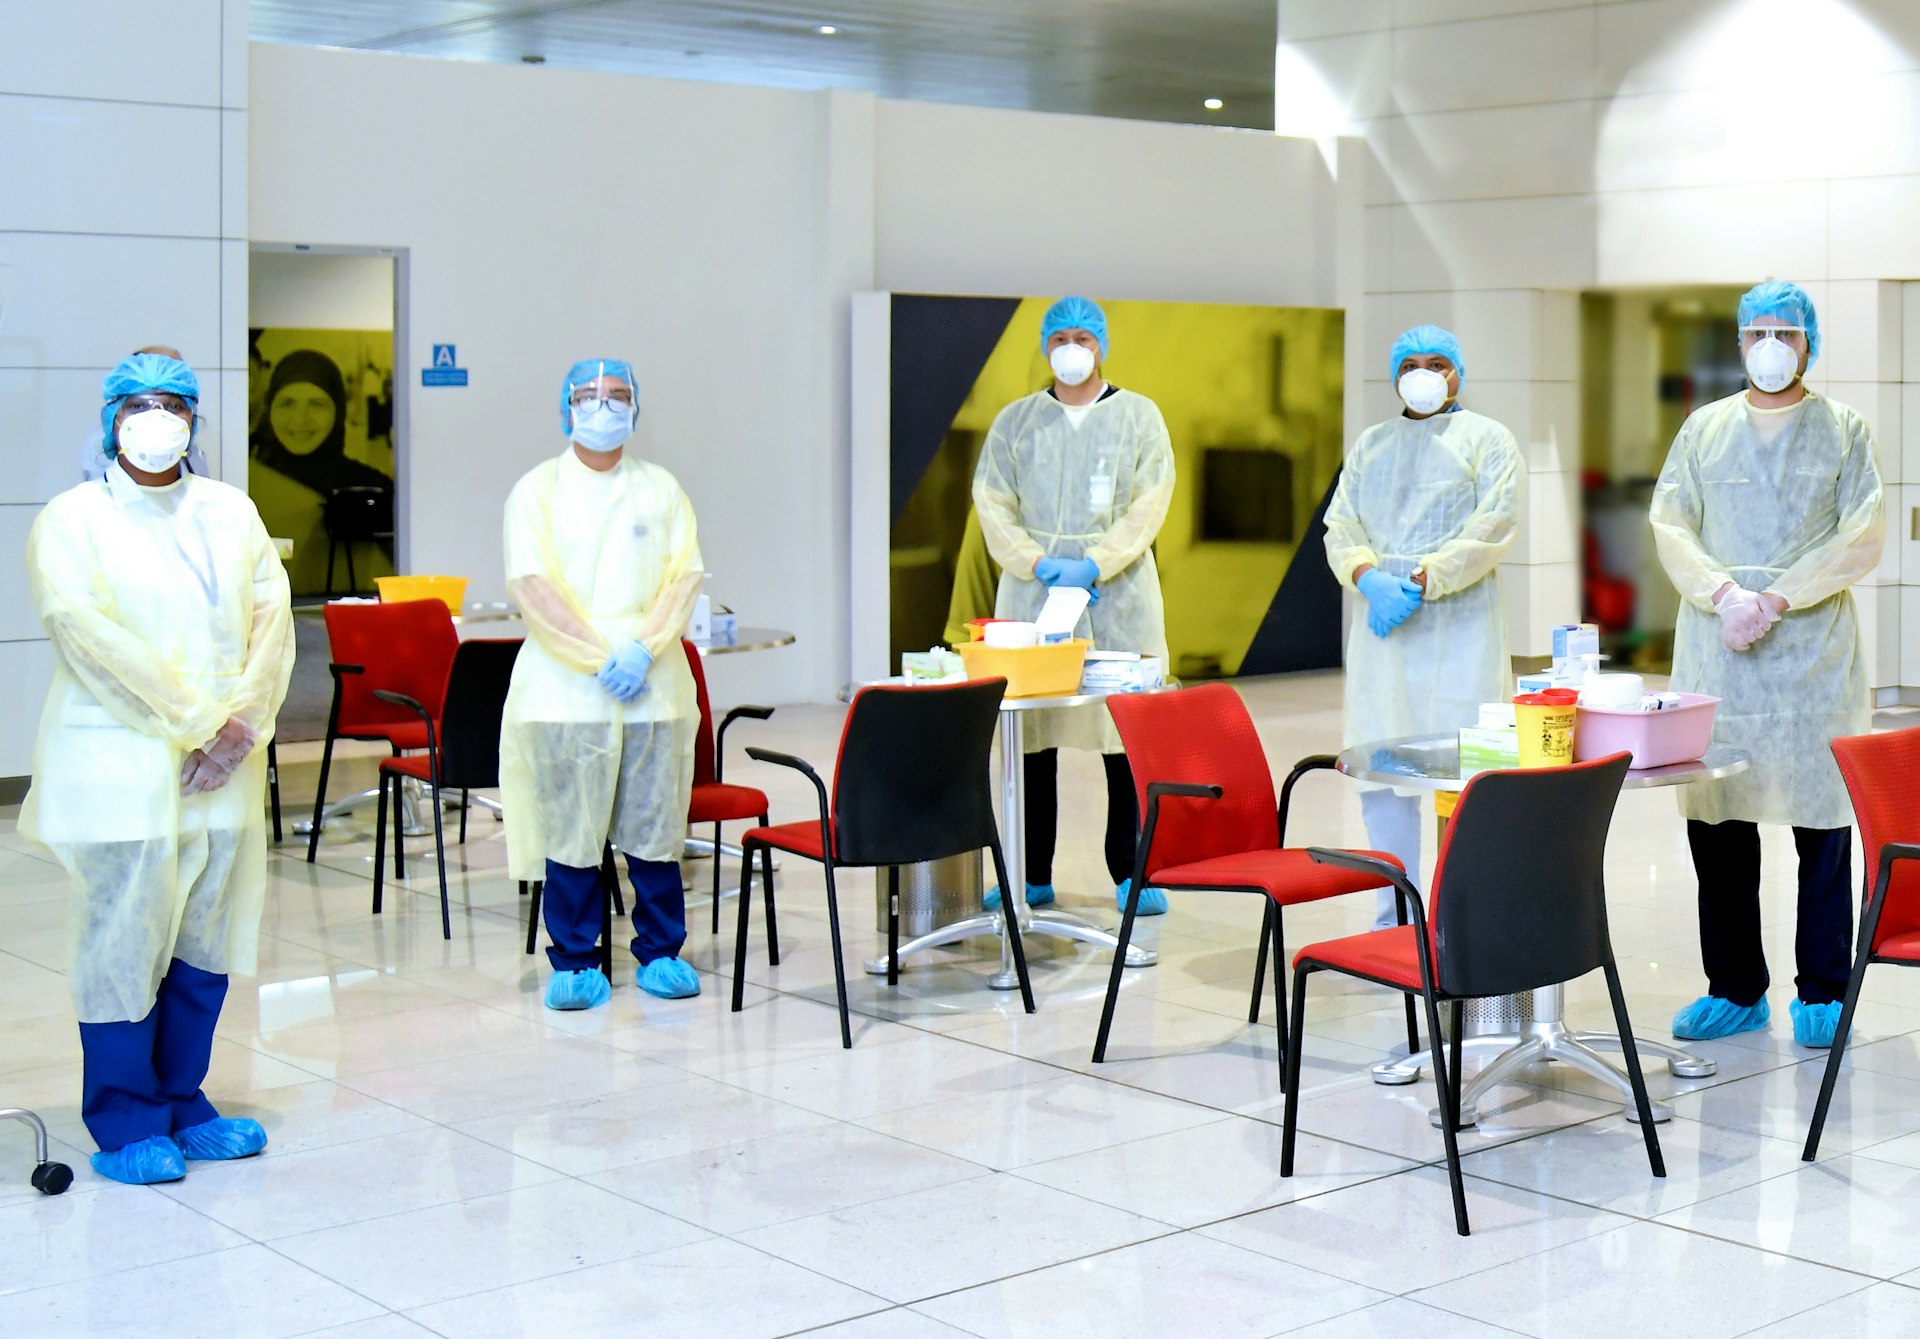 Dubai medical professionals pose in the airport wearing PPE